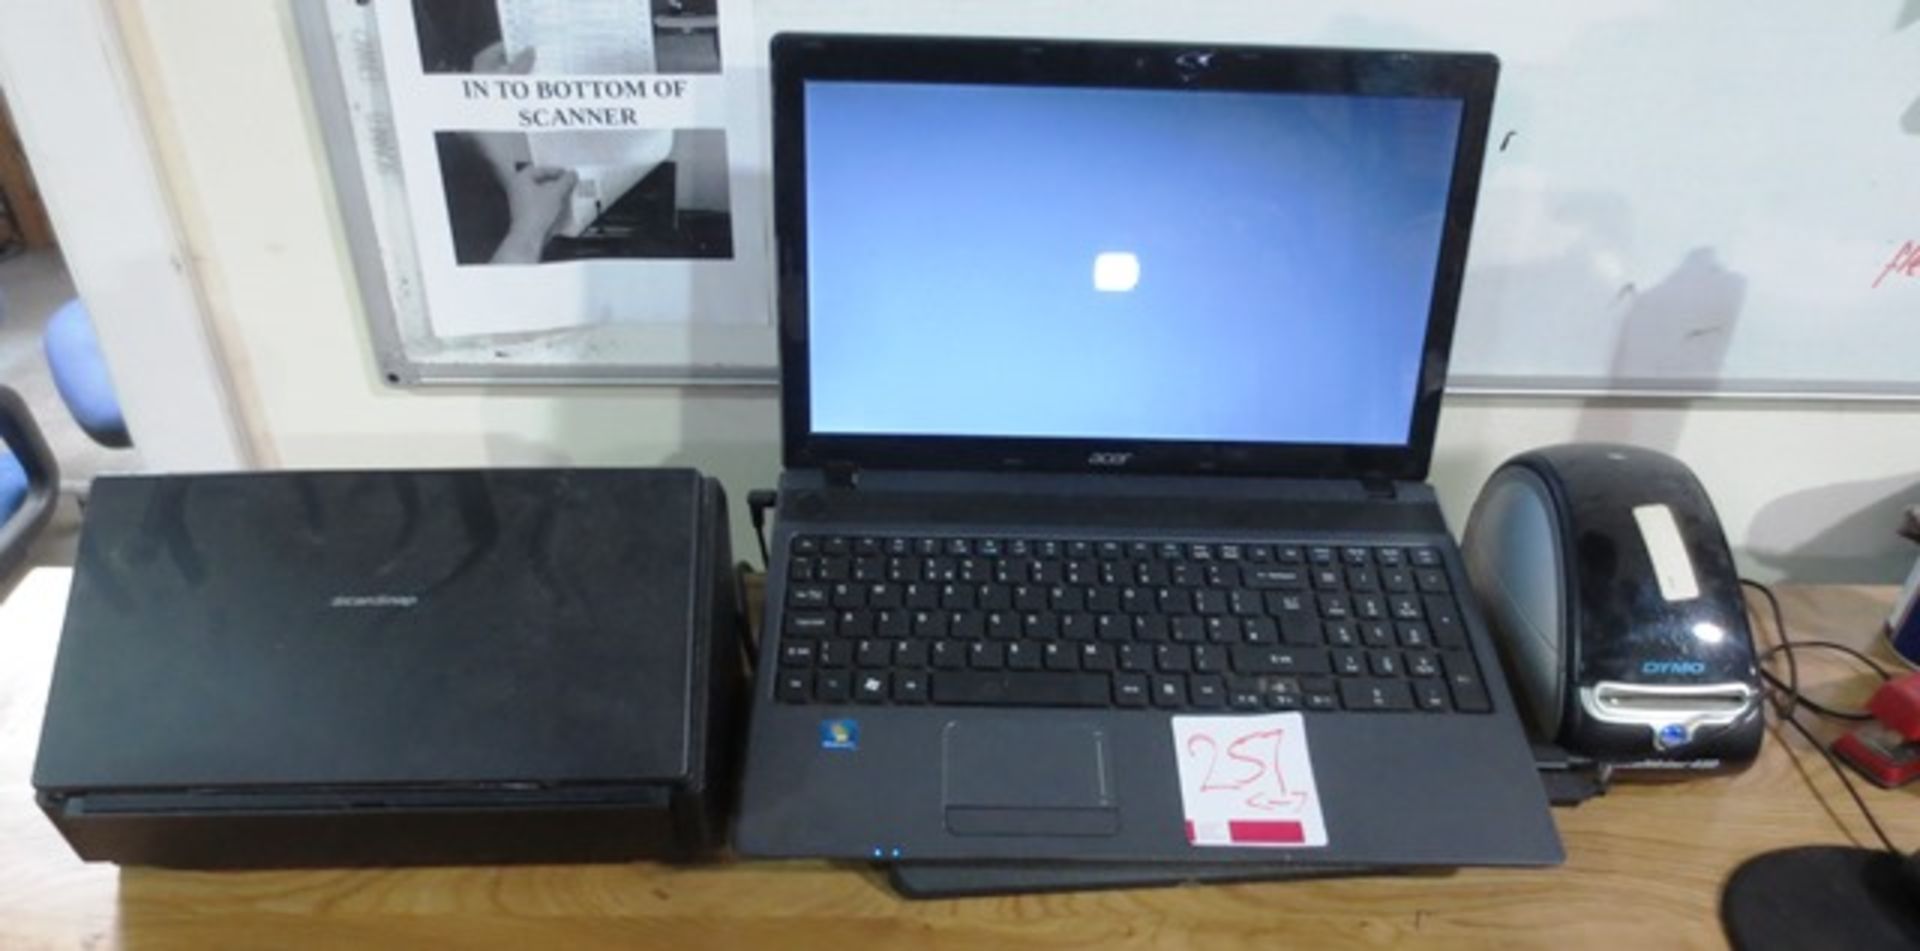 Acer 5250 series laptop, Dyno 450 Labelwriter and a scan snap